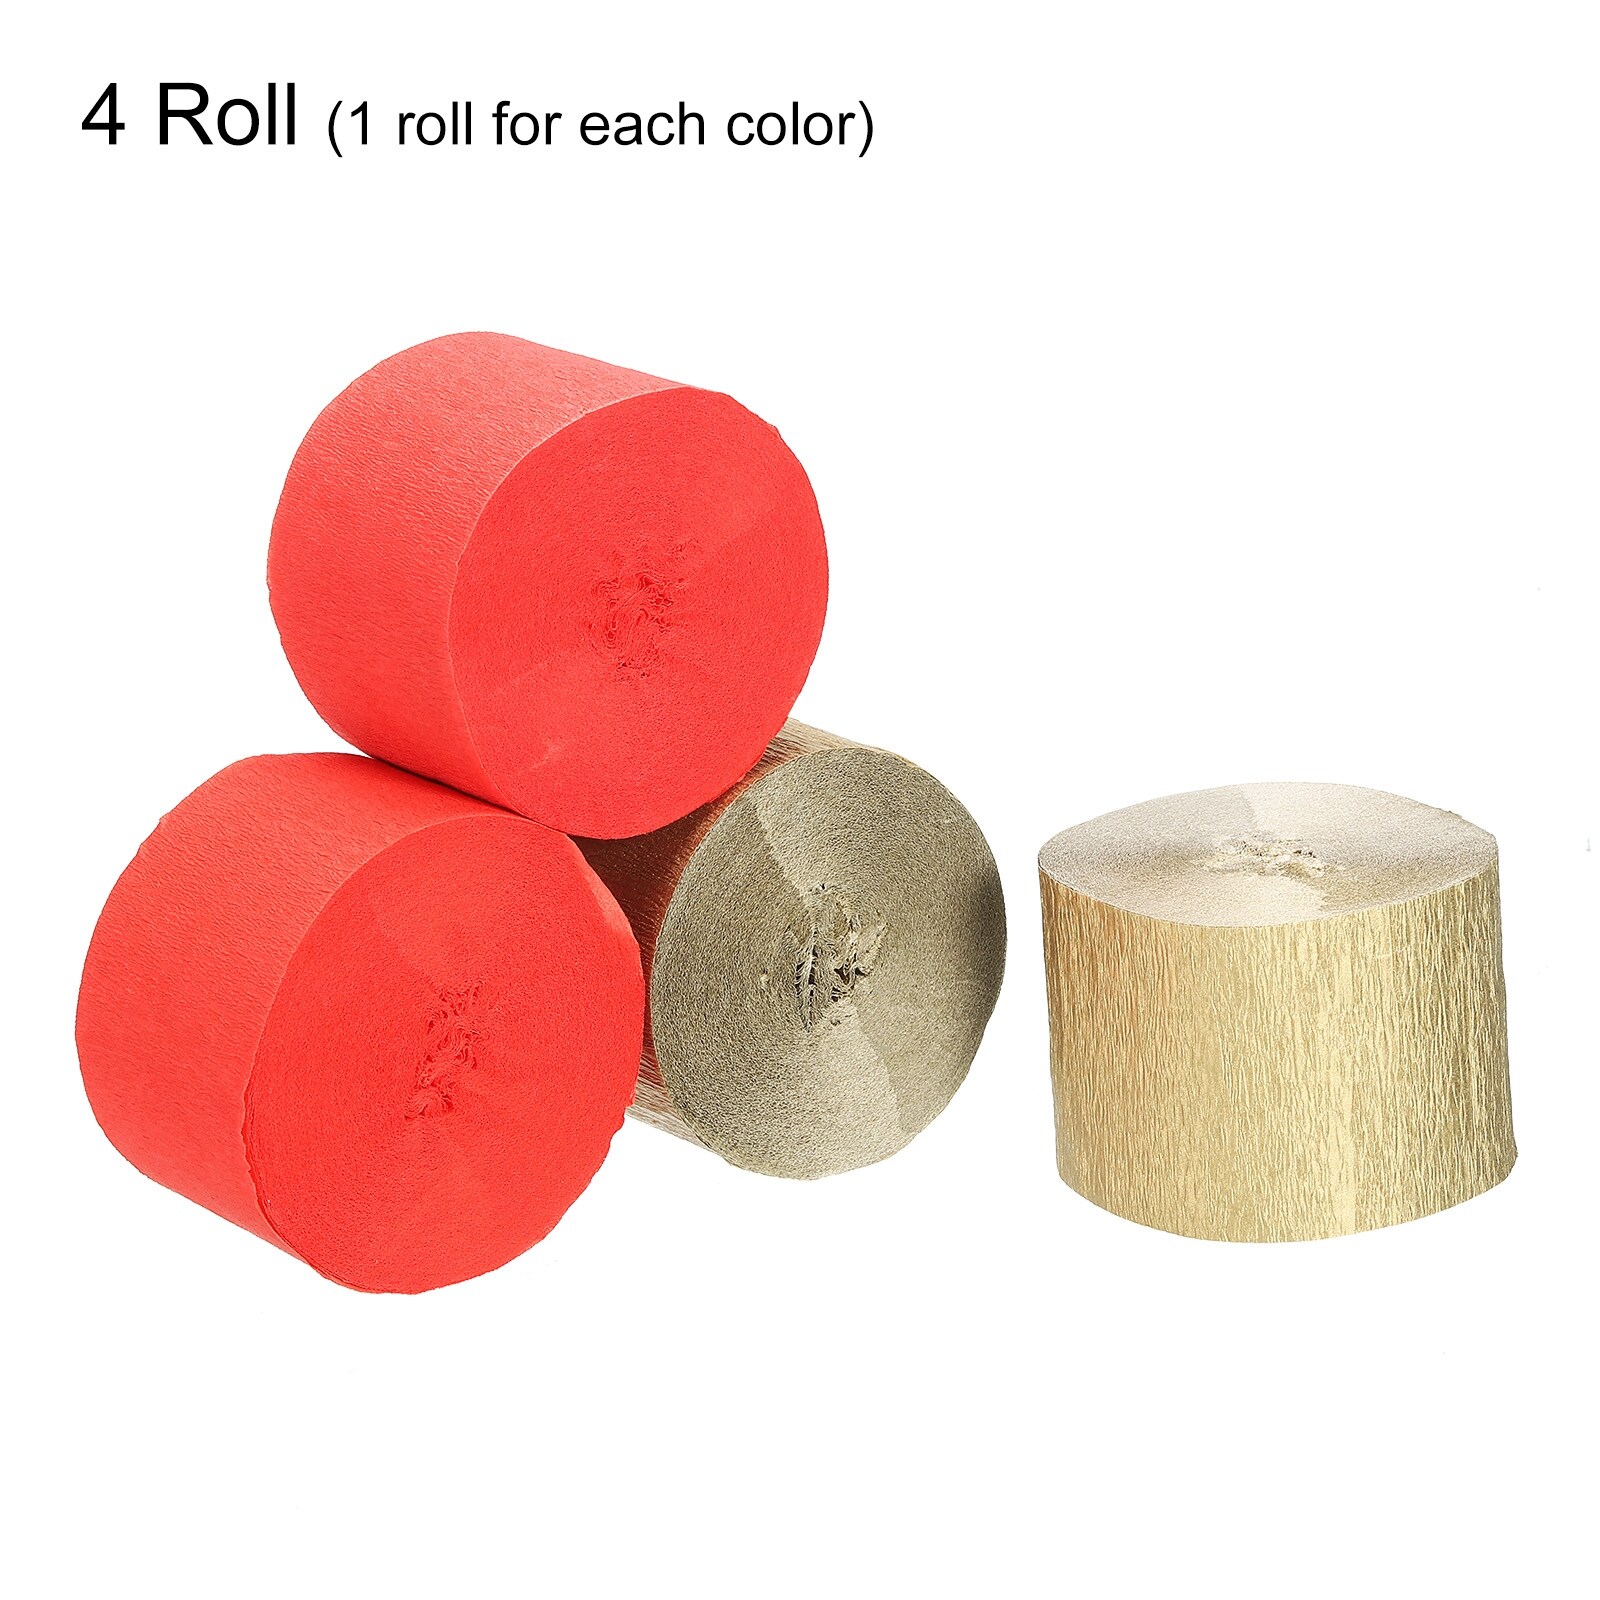 Crepe Paper Streamers 3 Rolls 72ft in 3 Colors for Party Decorations - Gold  Tone, White, Pastel Pink - Bed Bath & Beyond - 37098994